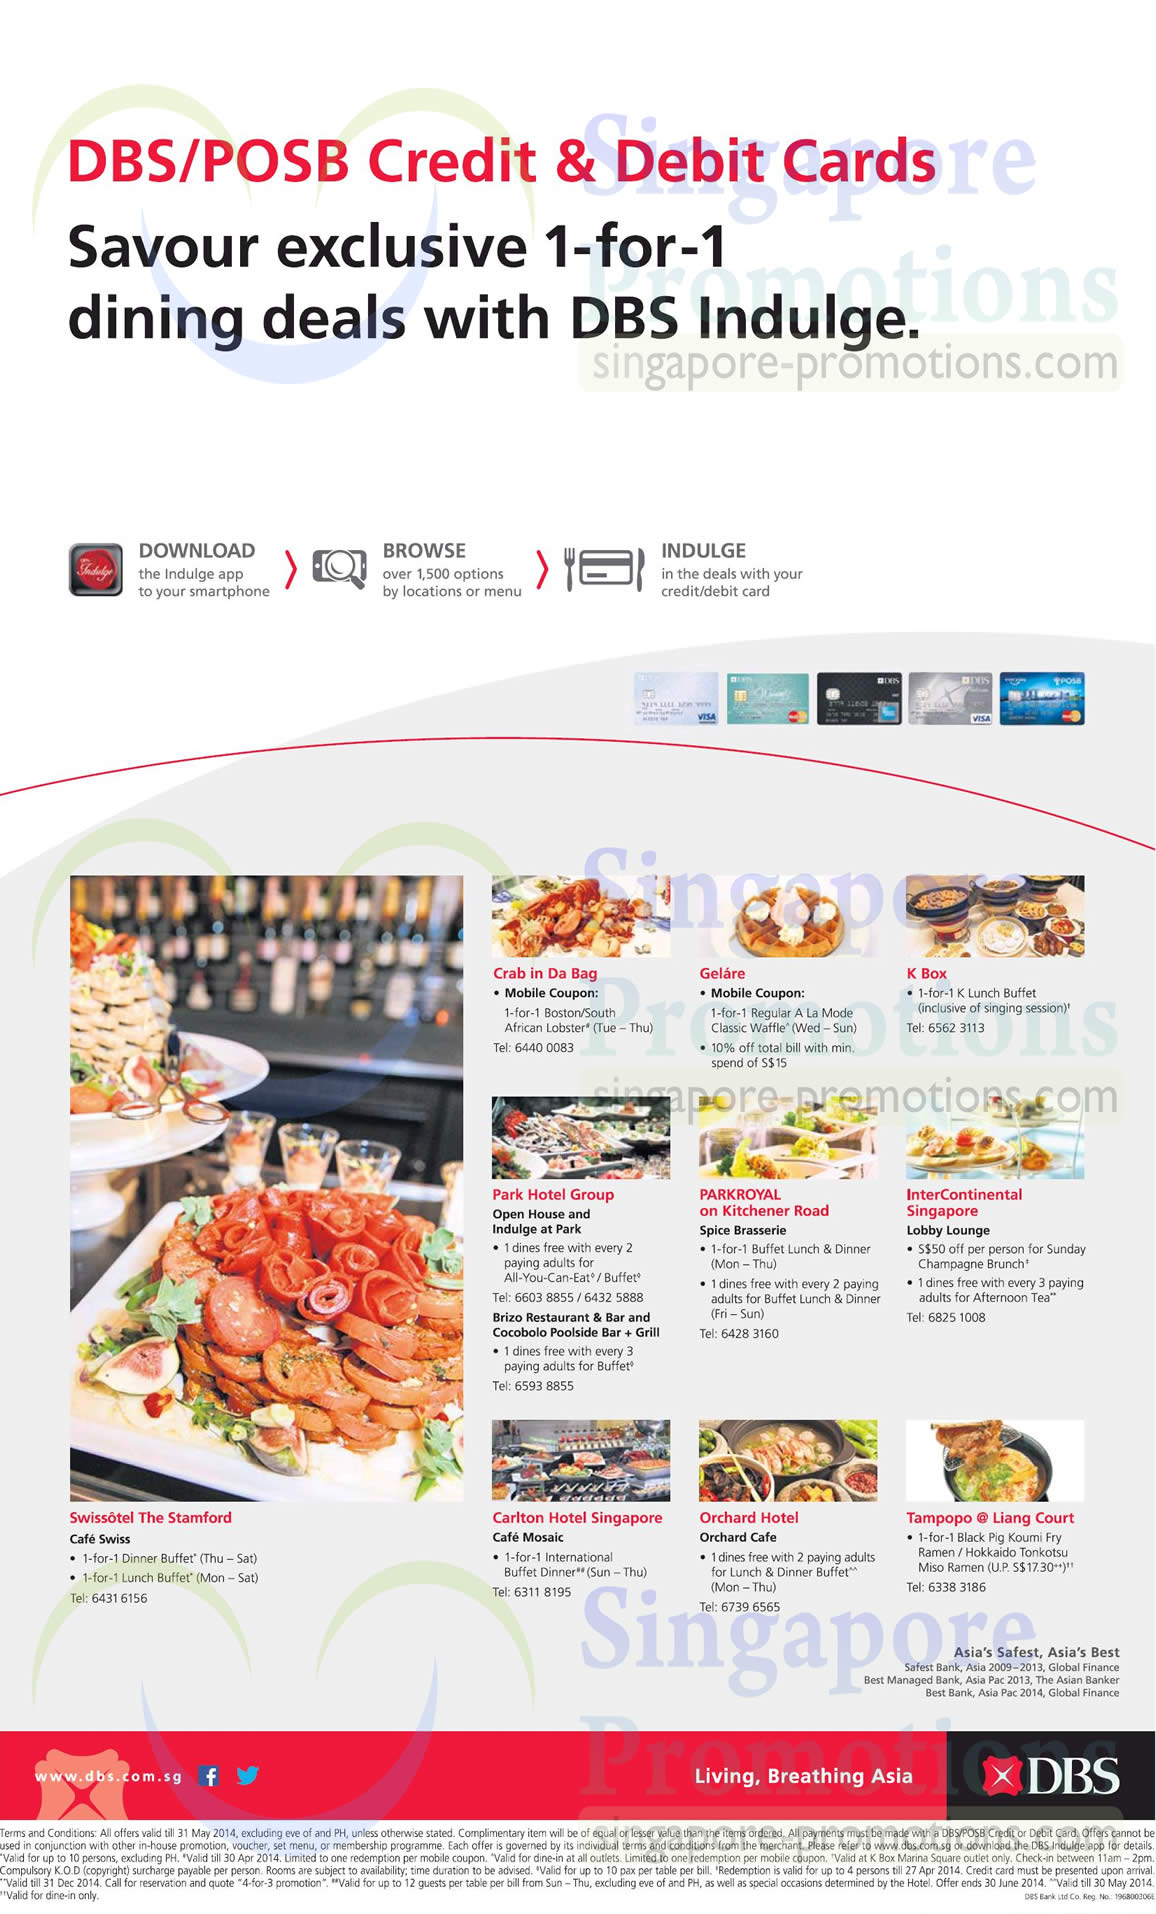 Featured image for DBS/POSB 1 for 1 Dining Deals For Credit/Debit Cardmembers 3 Apr - 31 May 2014